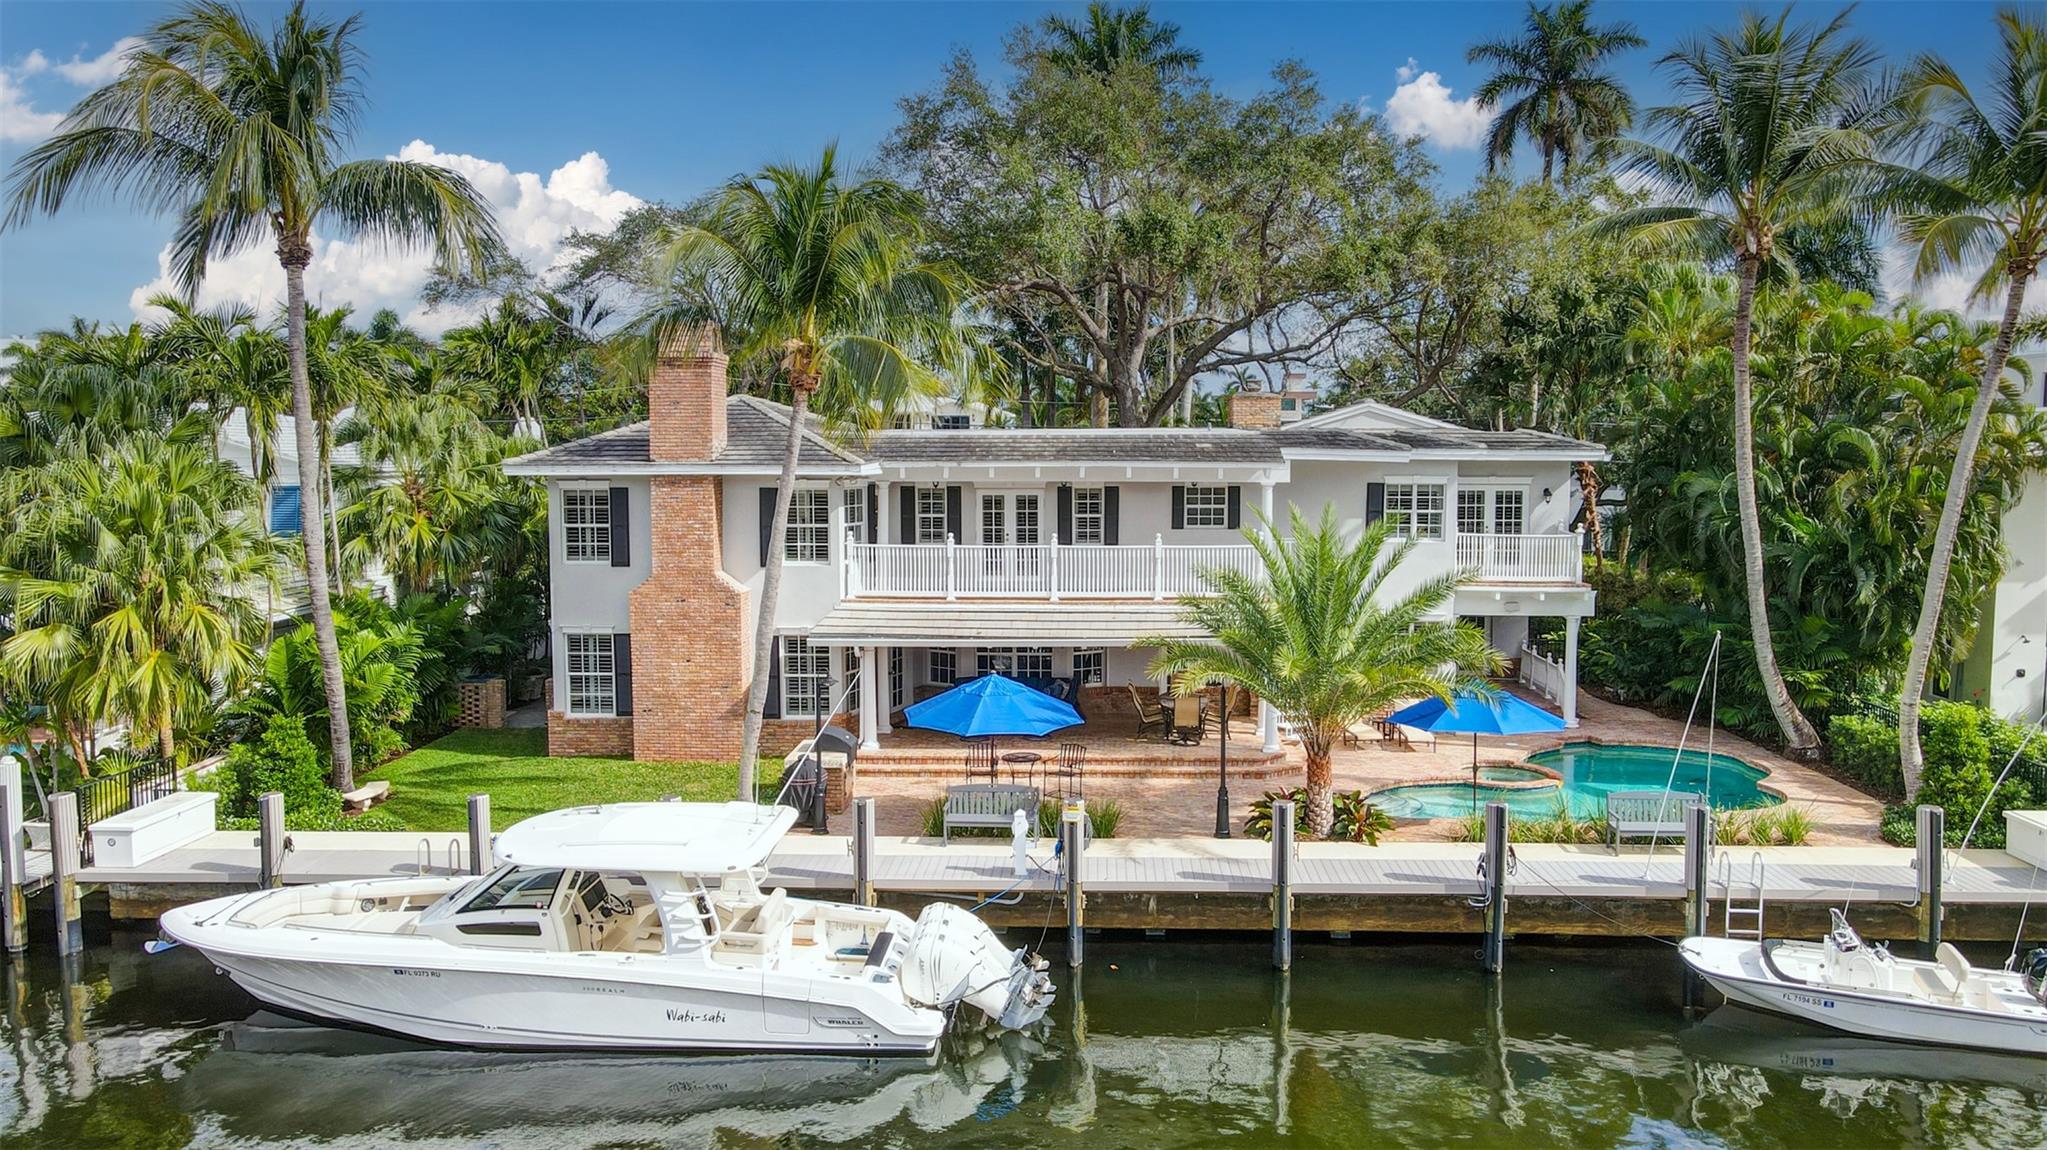 Currently the very best-priced deepwater Las Olas Isles home per sf on 100ft of waterfrontage! Ideal for boaters. Offering a new 2022 seawall cap, dock & 100 amp service. New roof in 2018. Spacious living areas flow effortlessly with pool/canal & distant New River views. Oak wood floors & fireplaces. 1st floor: Formal living & dining, great room, breakfast area, open kitchen, bar/butler's pantry & utility room, additional media/family room, private 1st floor guest suite/cabana bath. 2nd level: flexible 5 bedrooms & home offices! Expansive primary suite occupies entire wing, includes bedroom, private sitting room & balcony + large home office. Situated on a secure, patrolled isle, newly paved street & underground utilities planned for 2024. Perfectly located for Las Olas & the beaches.